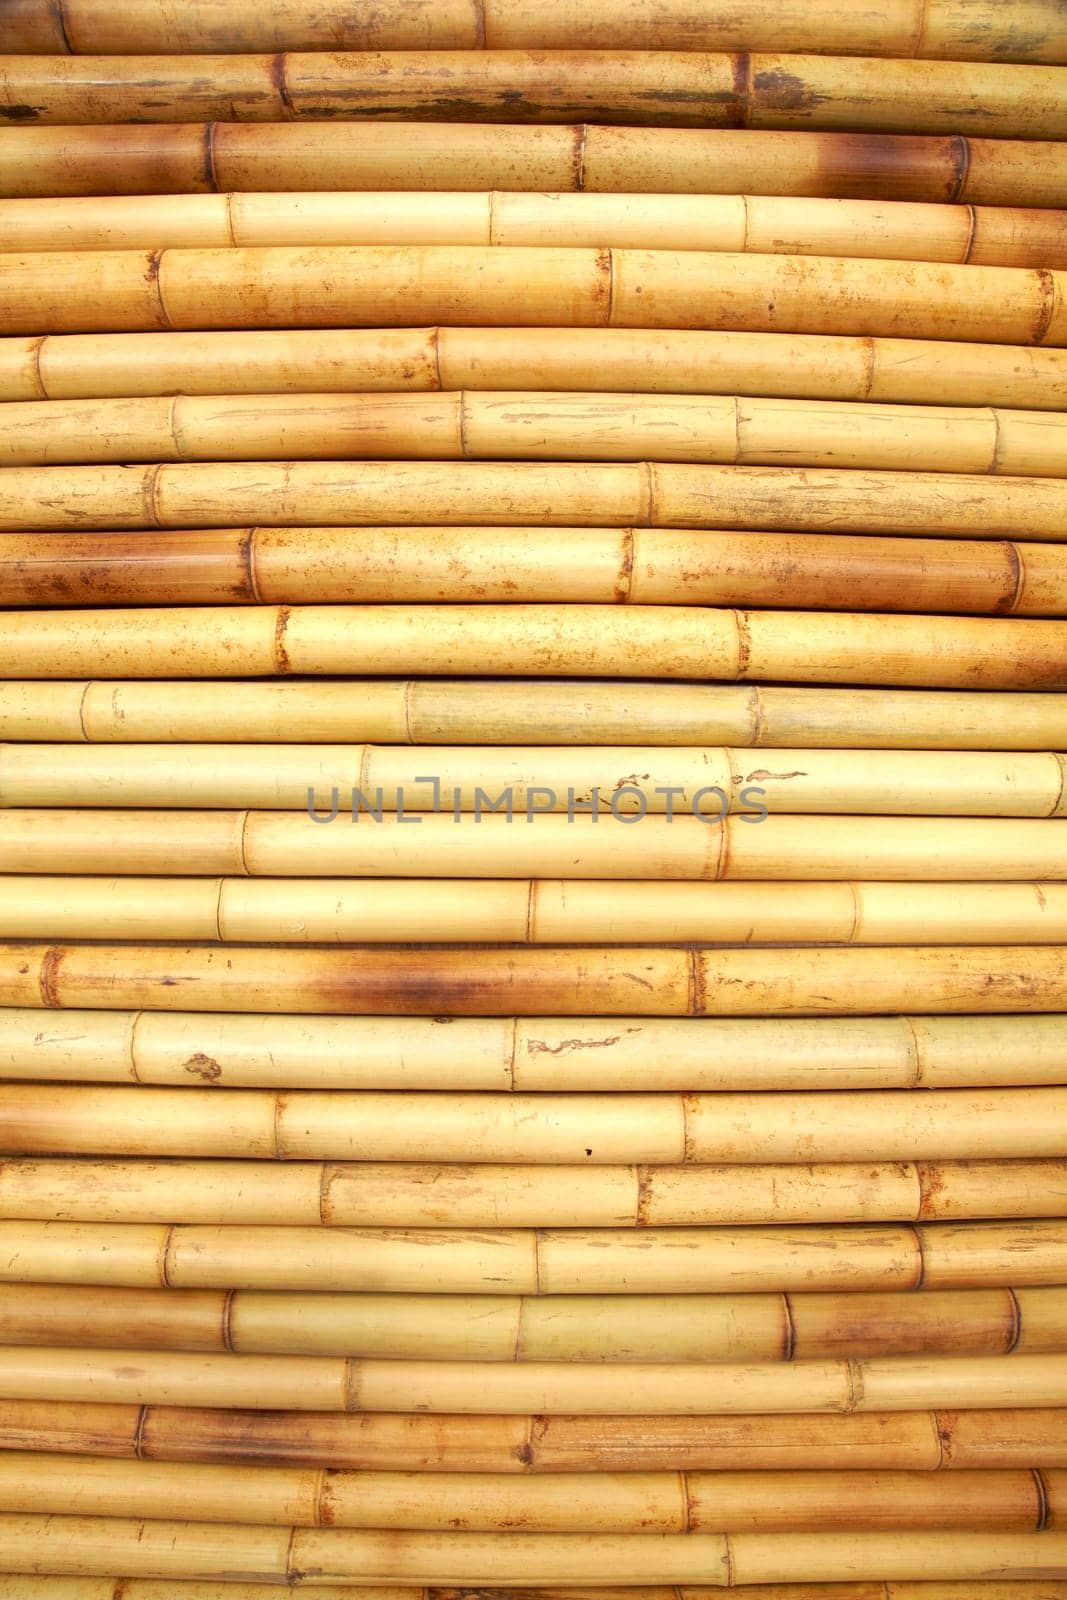 Bamboo cane background texture by emirkoo